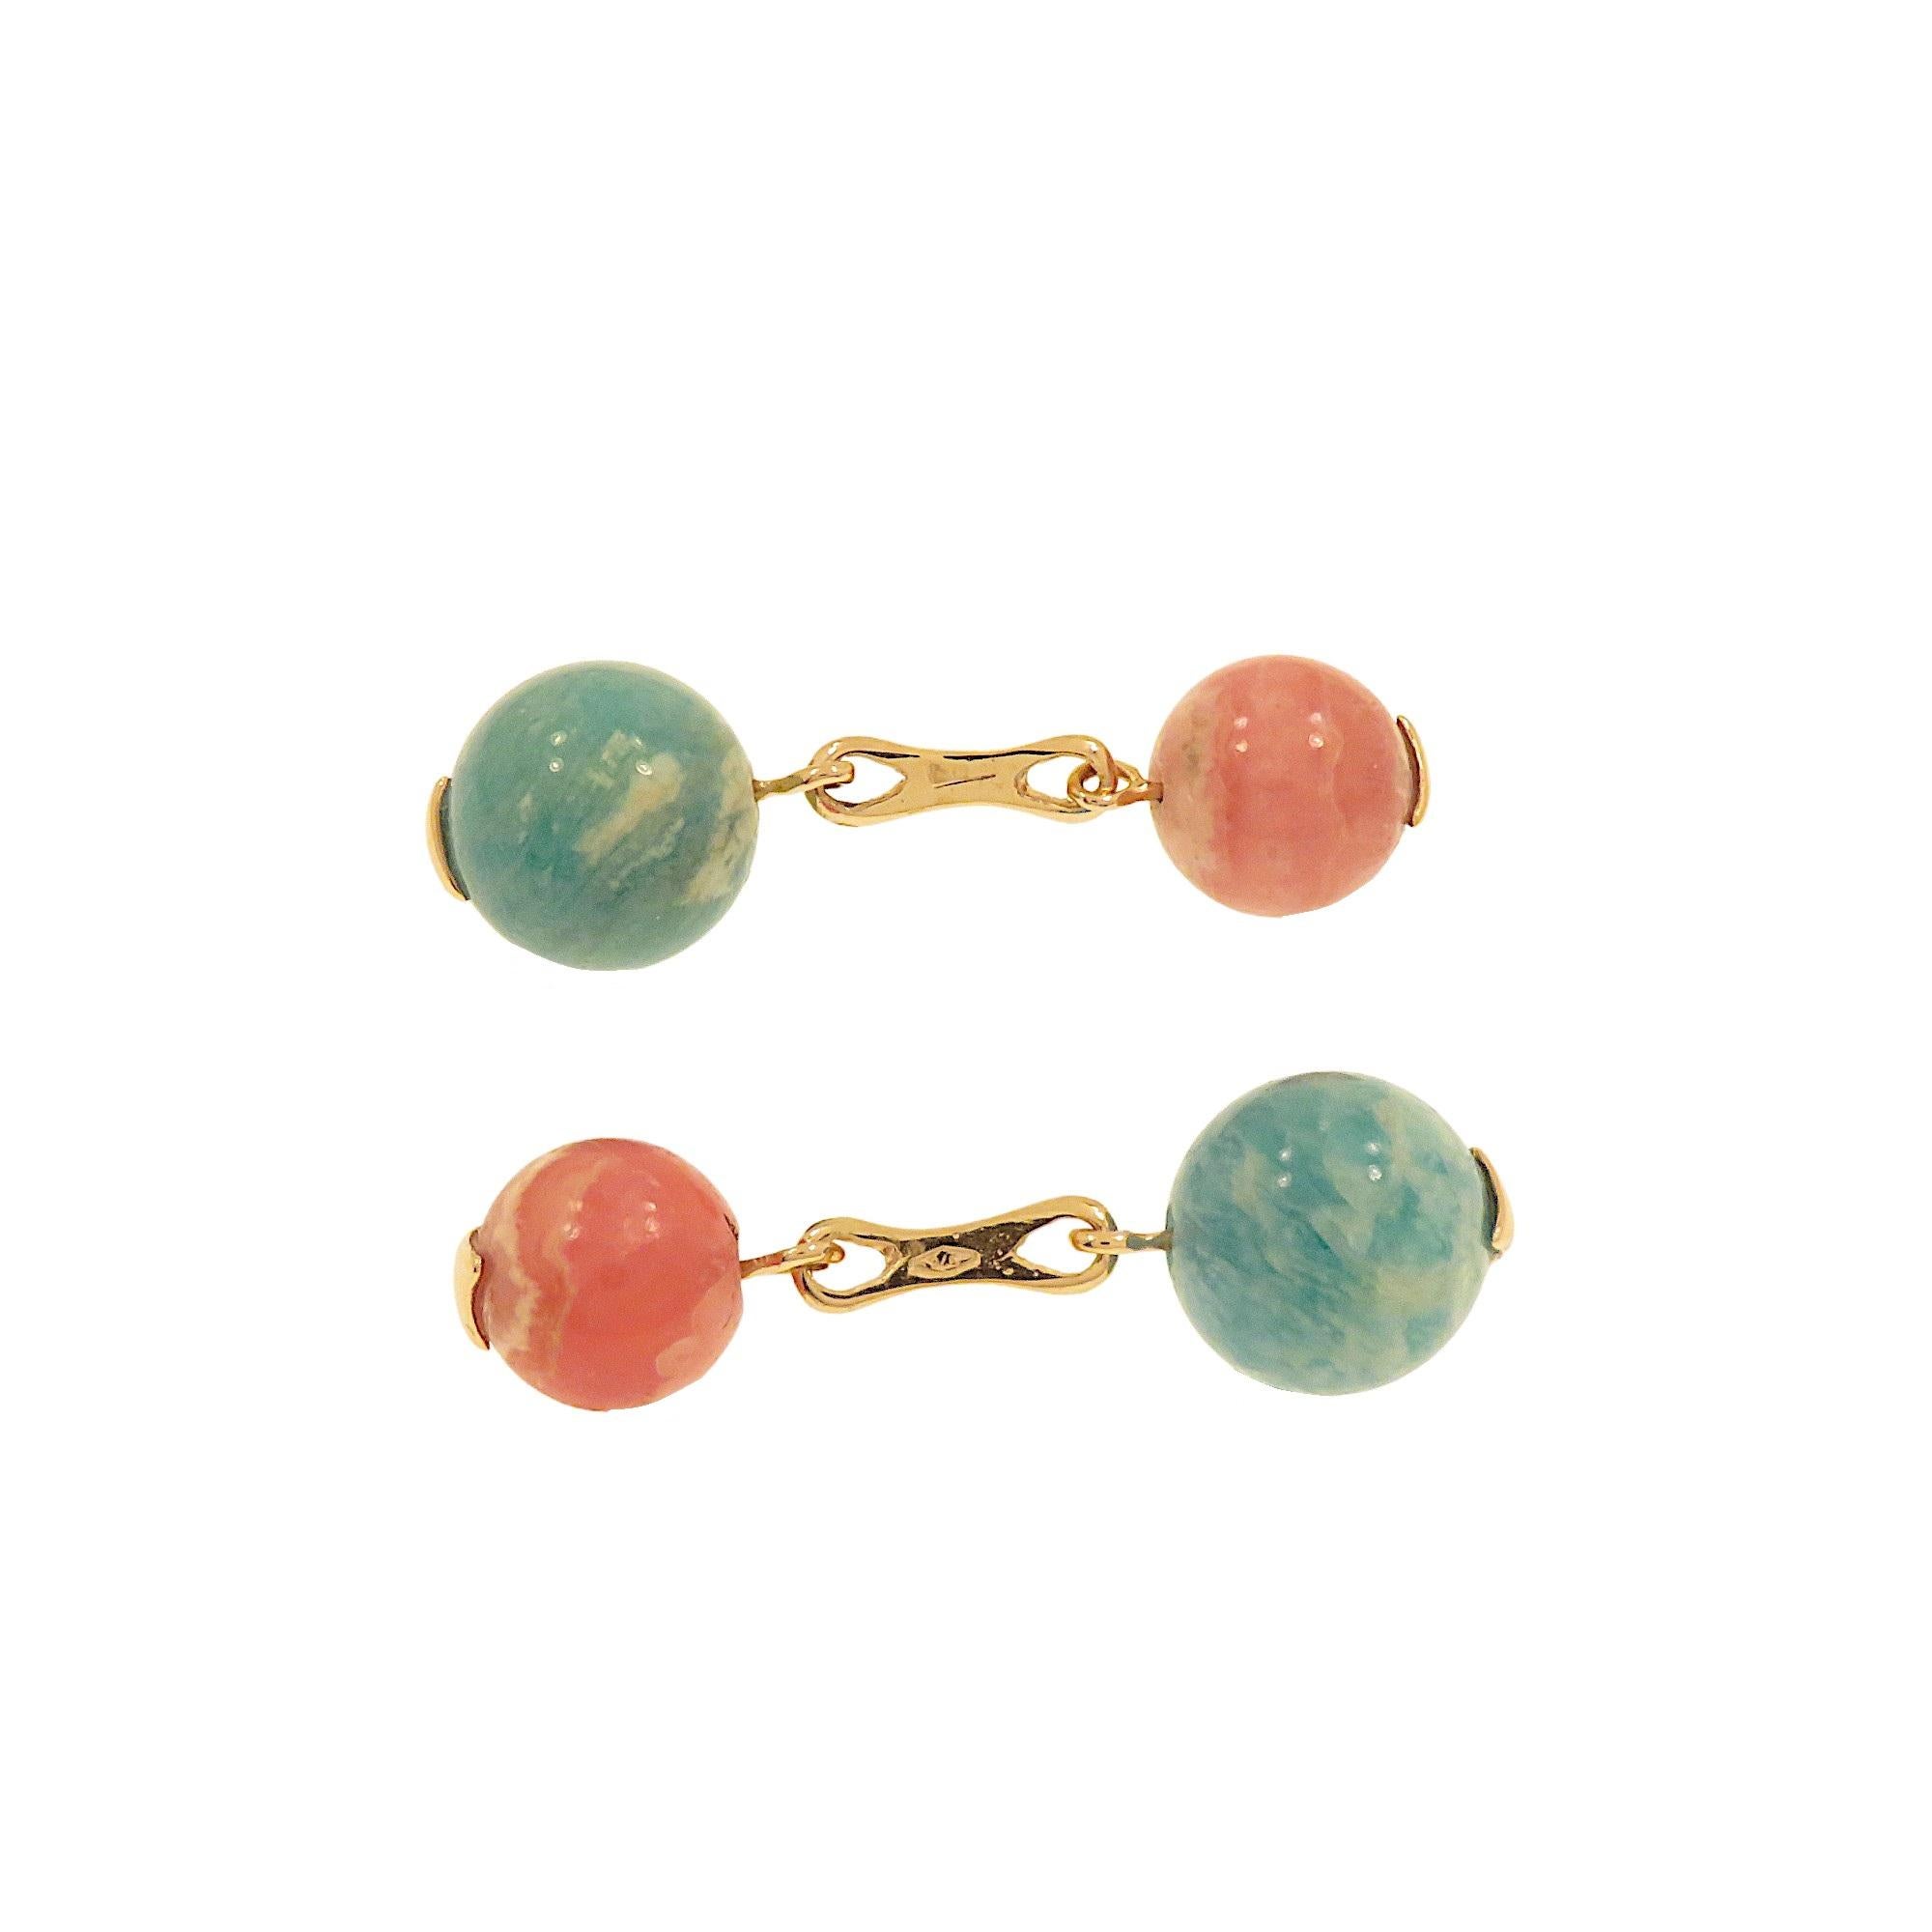 Contemporary Botta Jewelry cufflinks with rhodochrosite and amazonite in rose gold For Sale